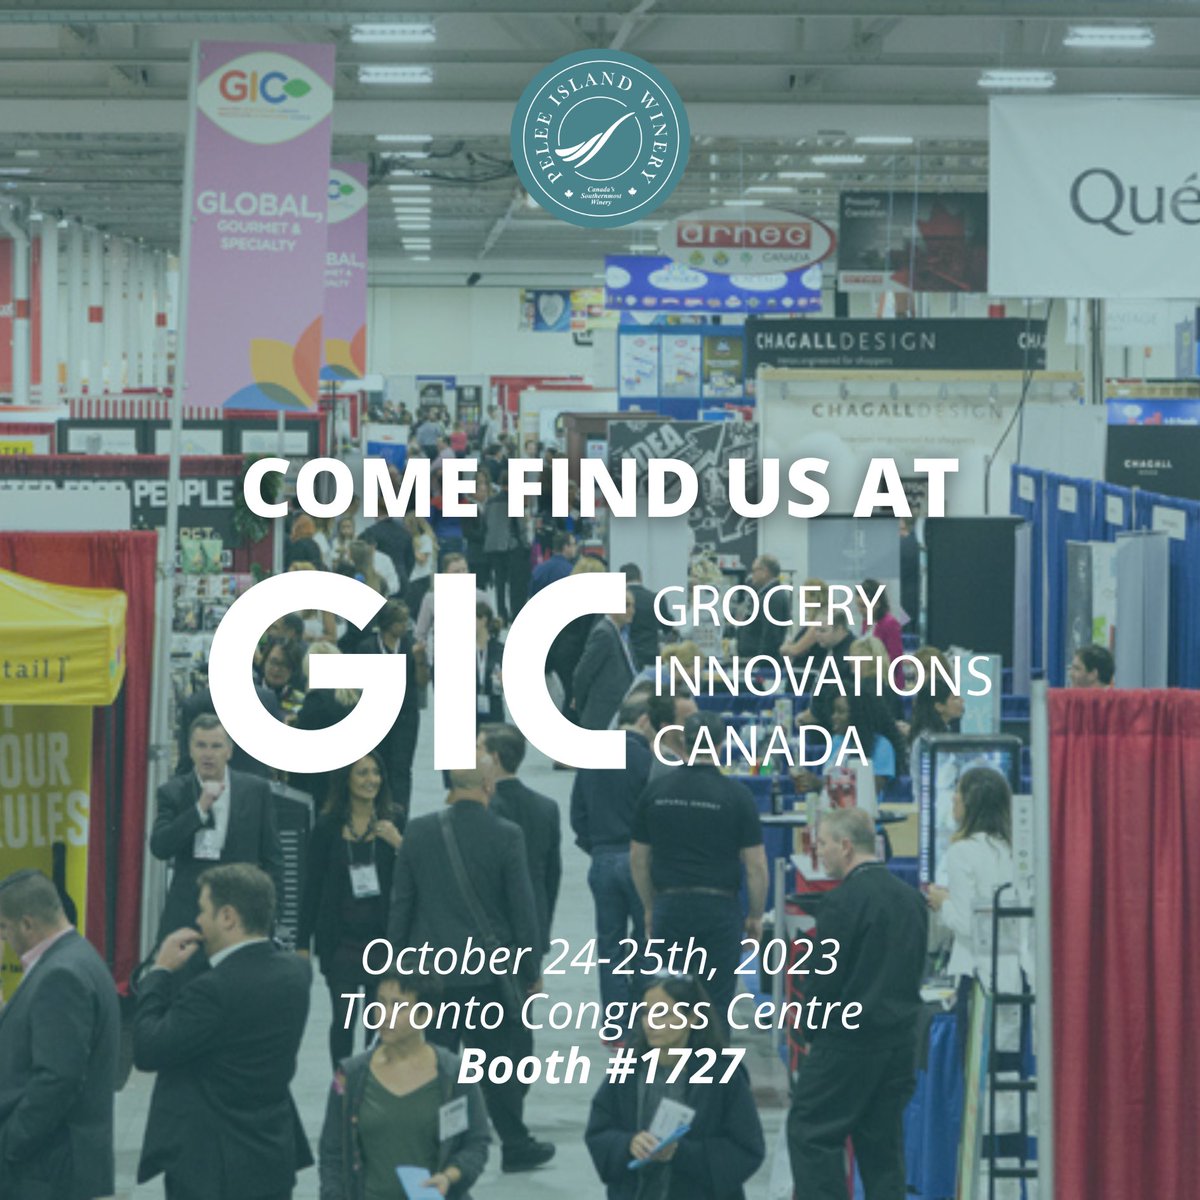 We’ll be at the #GICShow23 on Tuesday and Wednesday at the Toronto Congress Centre, North Building. Come visit us next week at booth 1727 to see what we’re pouring!🍷